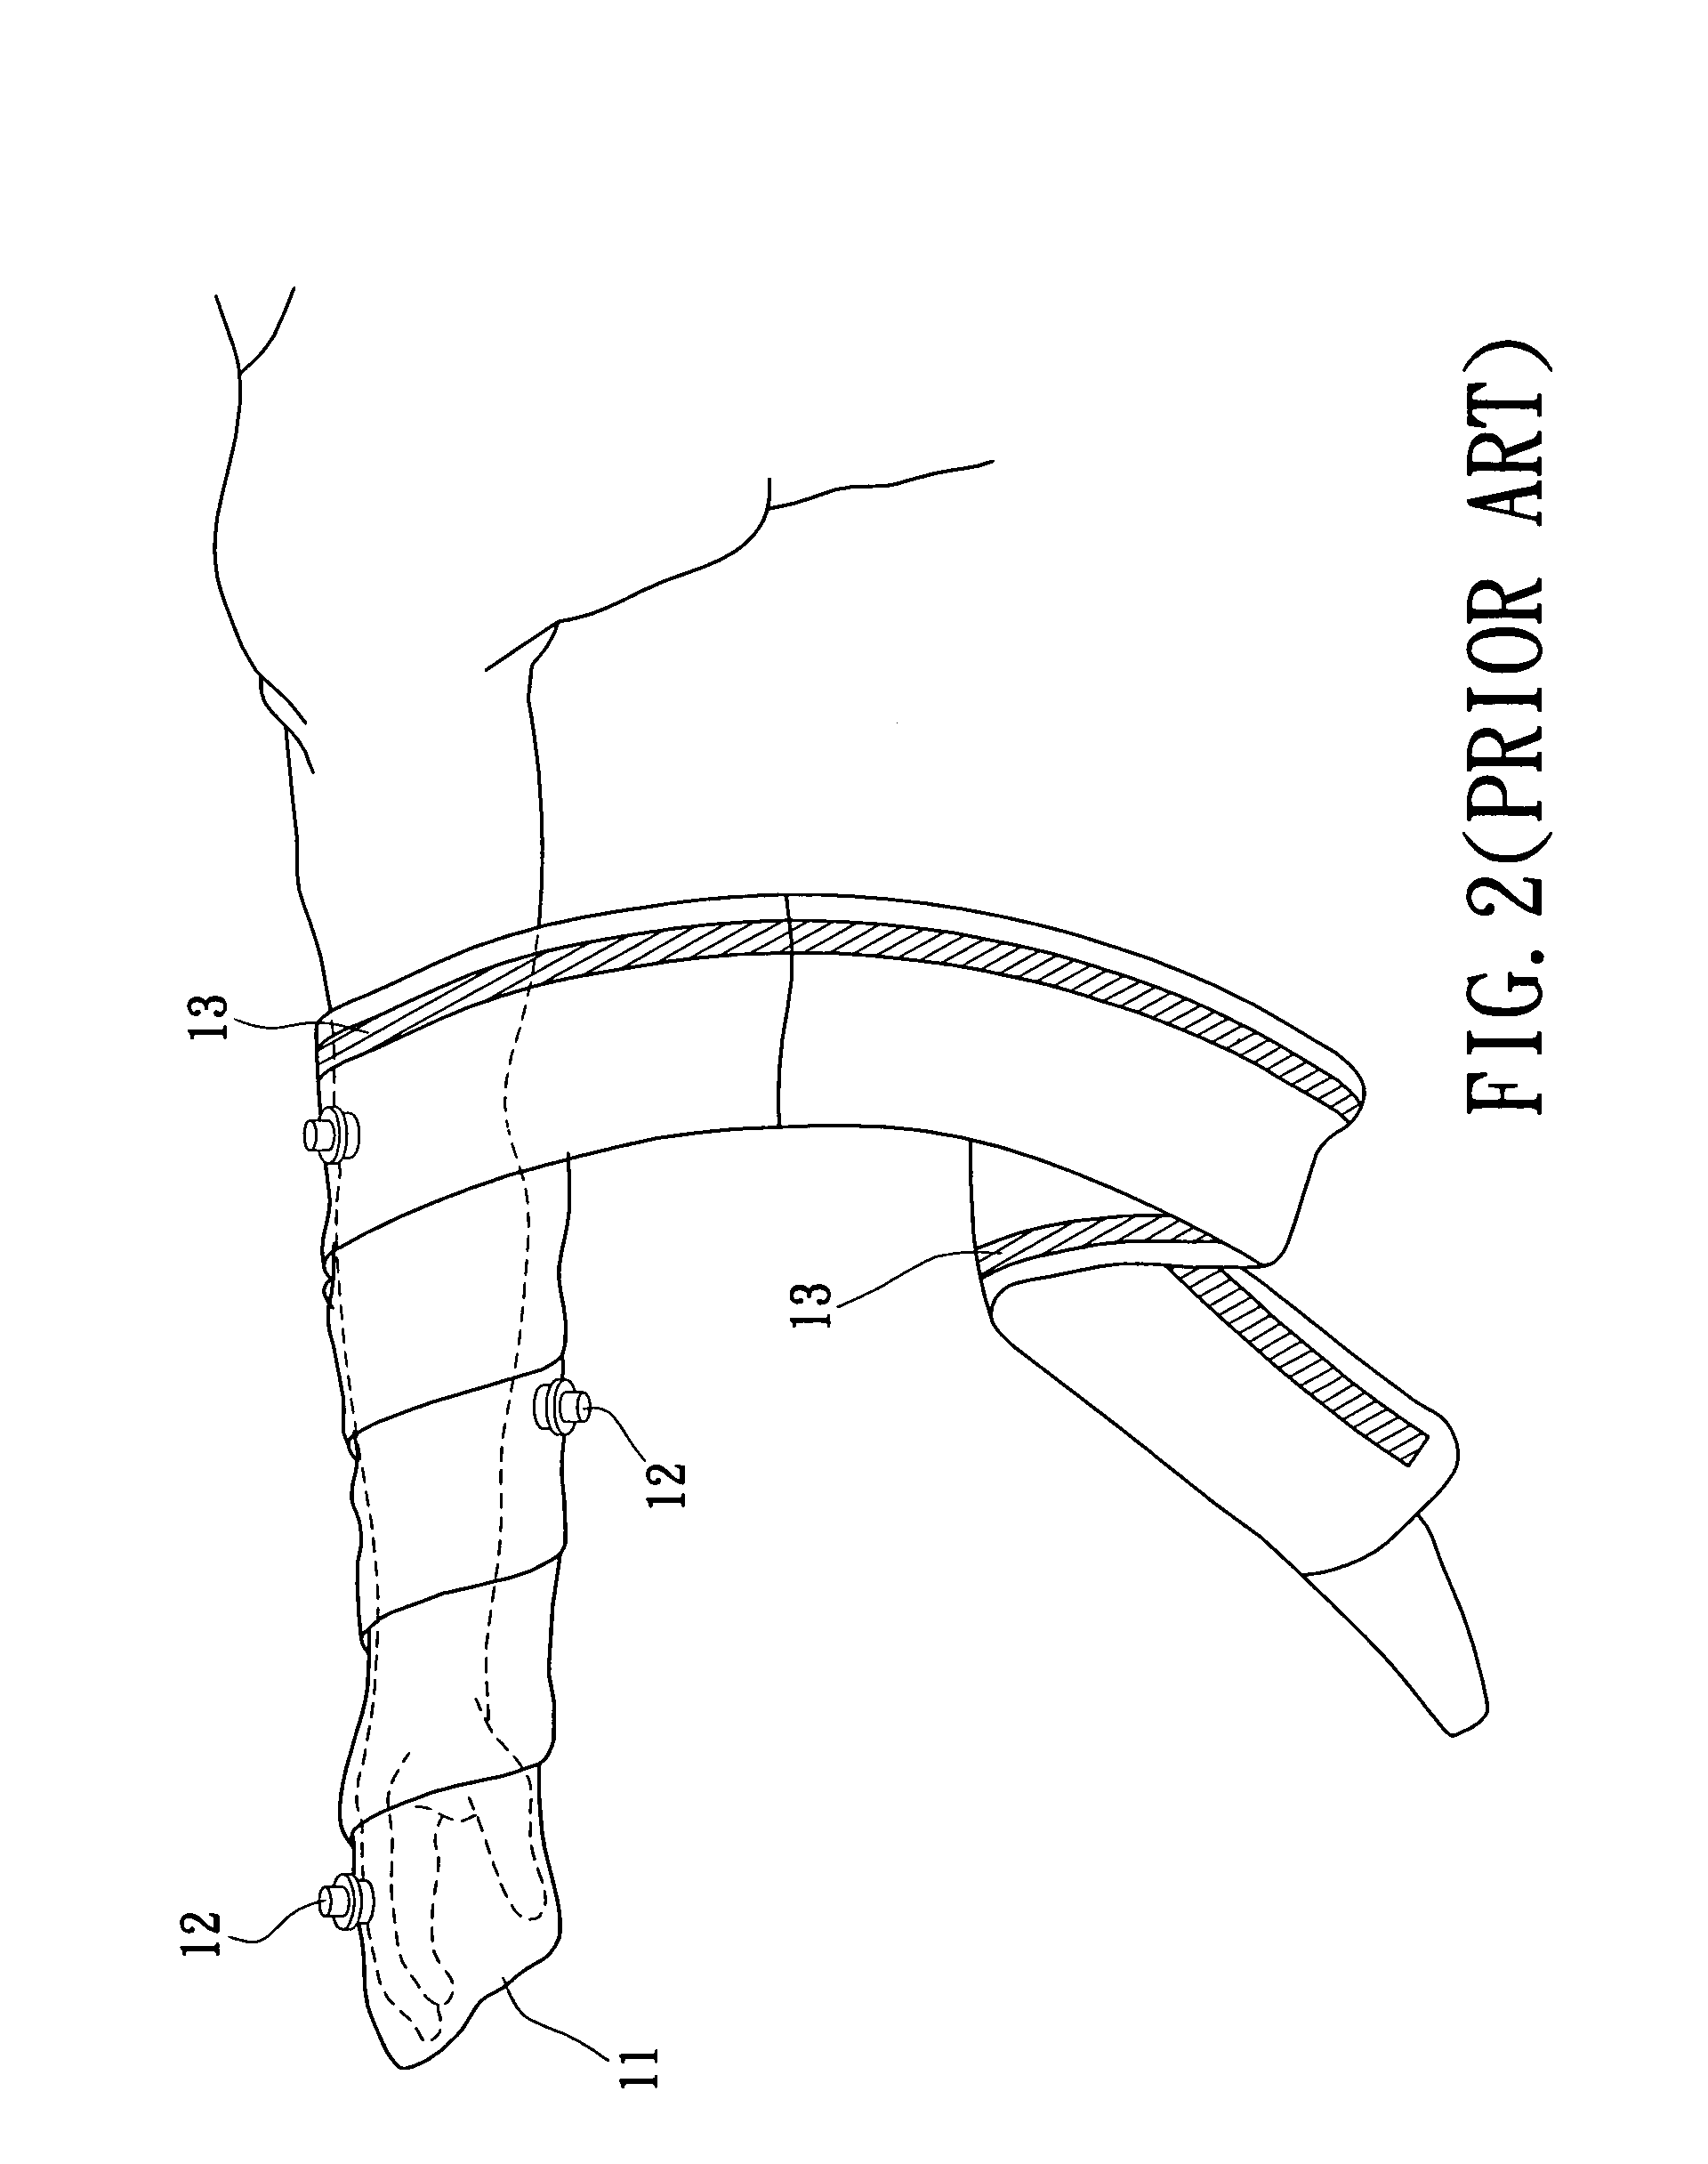 Compression device for medical treatment